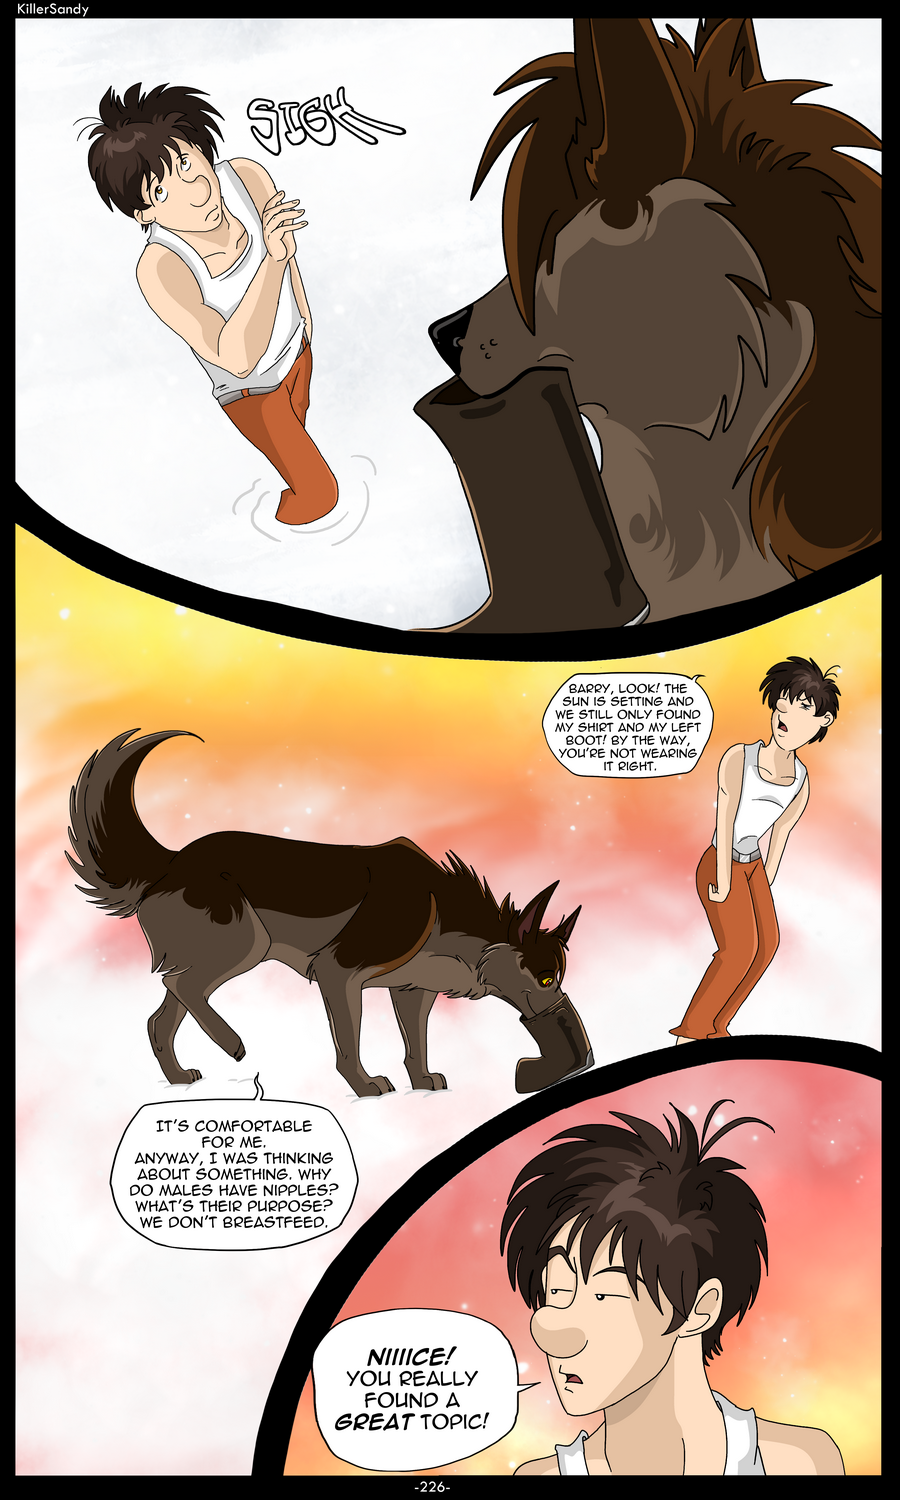 The Prince of the Moonlight Stone page 226